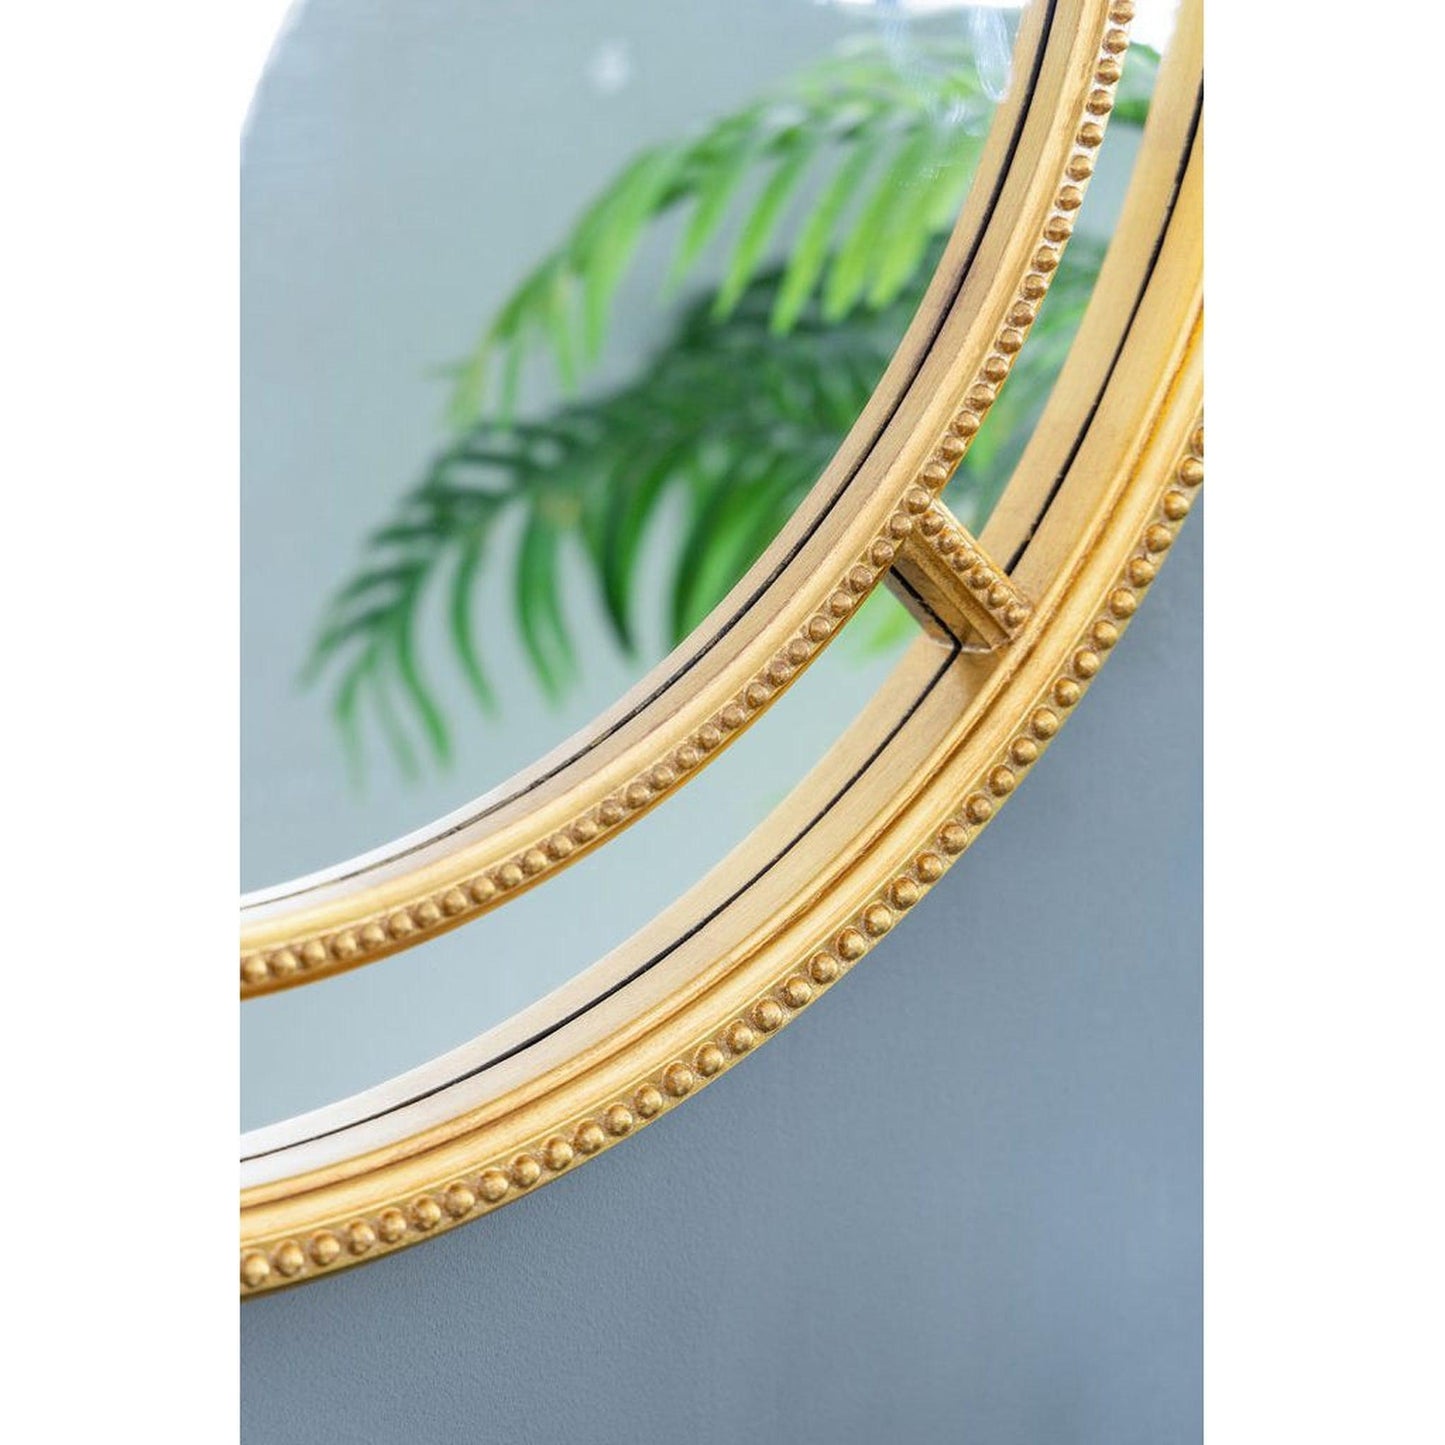 A&B Home 35" x 35" Bundle of 8 Round Gold Double Frame Wall-Mounted Mirror